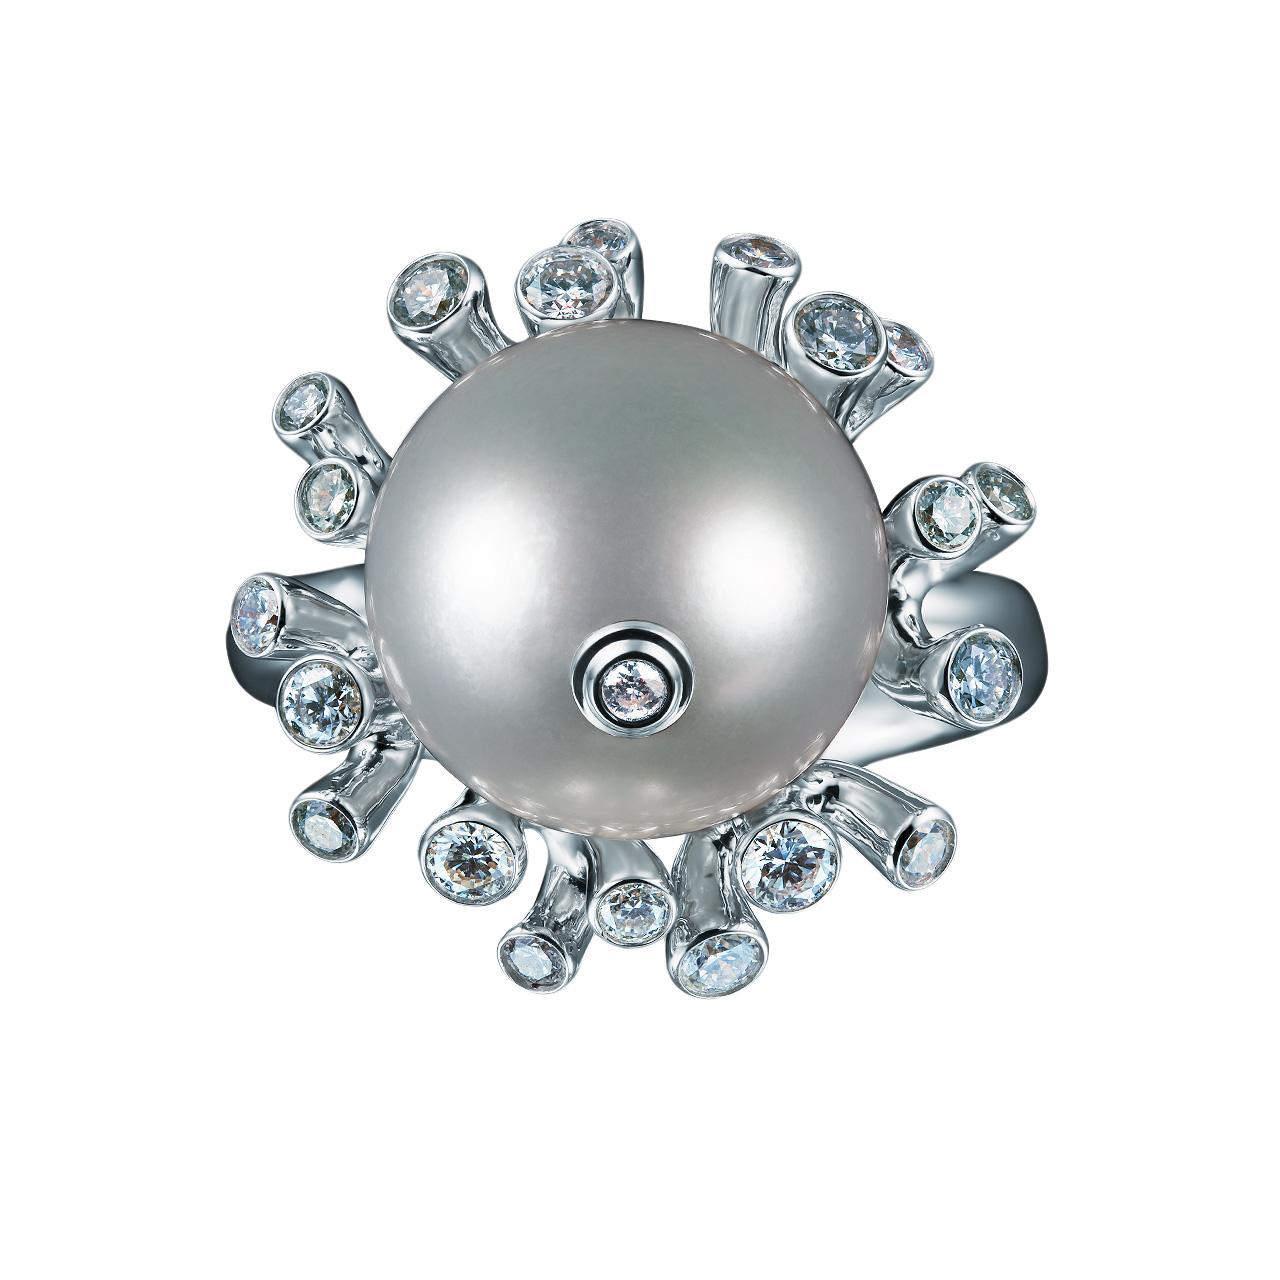 - 22 Round Diamonds - 0.43 ct, E-F/ VS
- 10.8 mm White South Sea pearl
- 18K White Gold 
- Weight: 9.69 g
- Size: 16.5 mm
This elegant ring from the Coral collection of Jewelry Theater features a lustrous white South Sea pearl, surrounded with gold